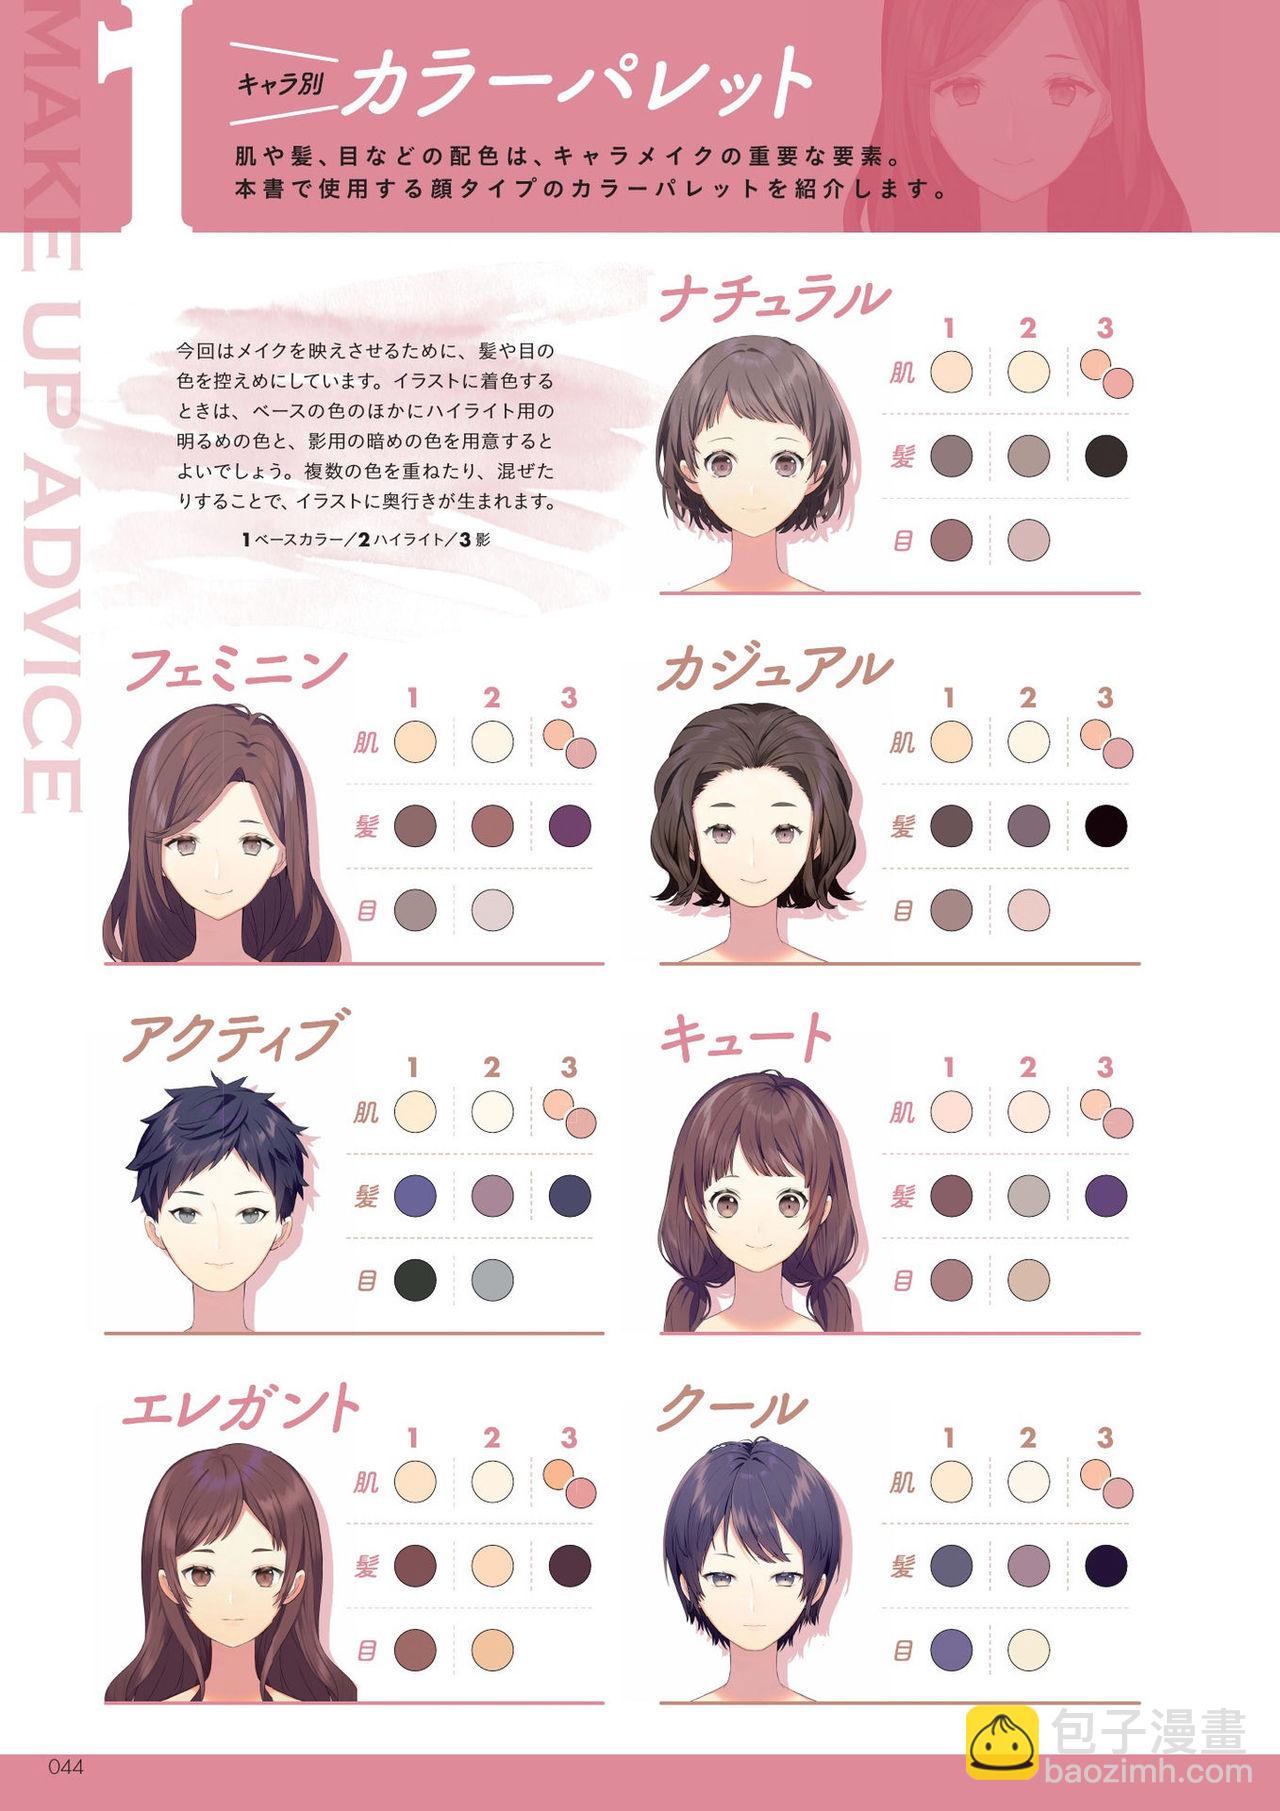 [sogawa]Super drawable series Techniques for drawing female characters with makeup  - 1話(1/4) - 6